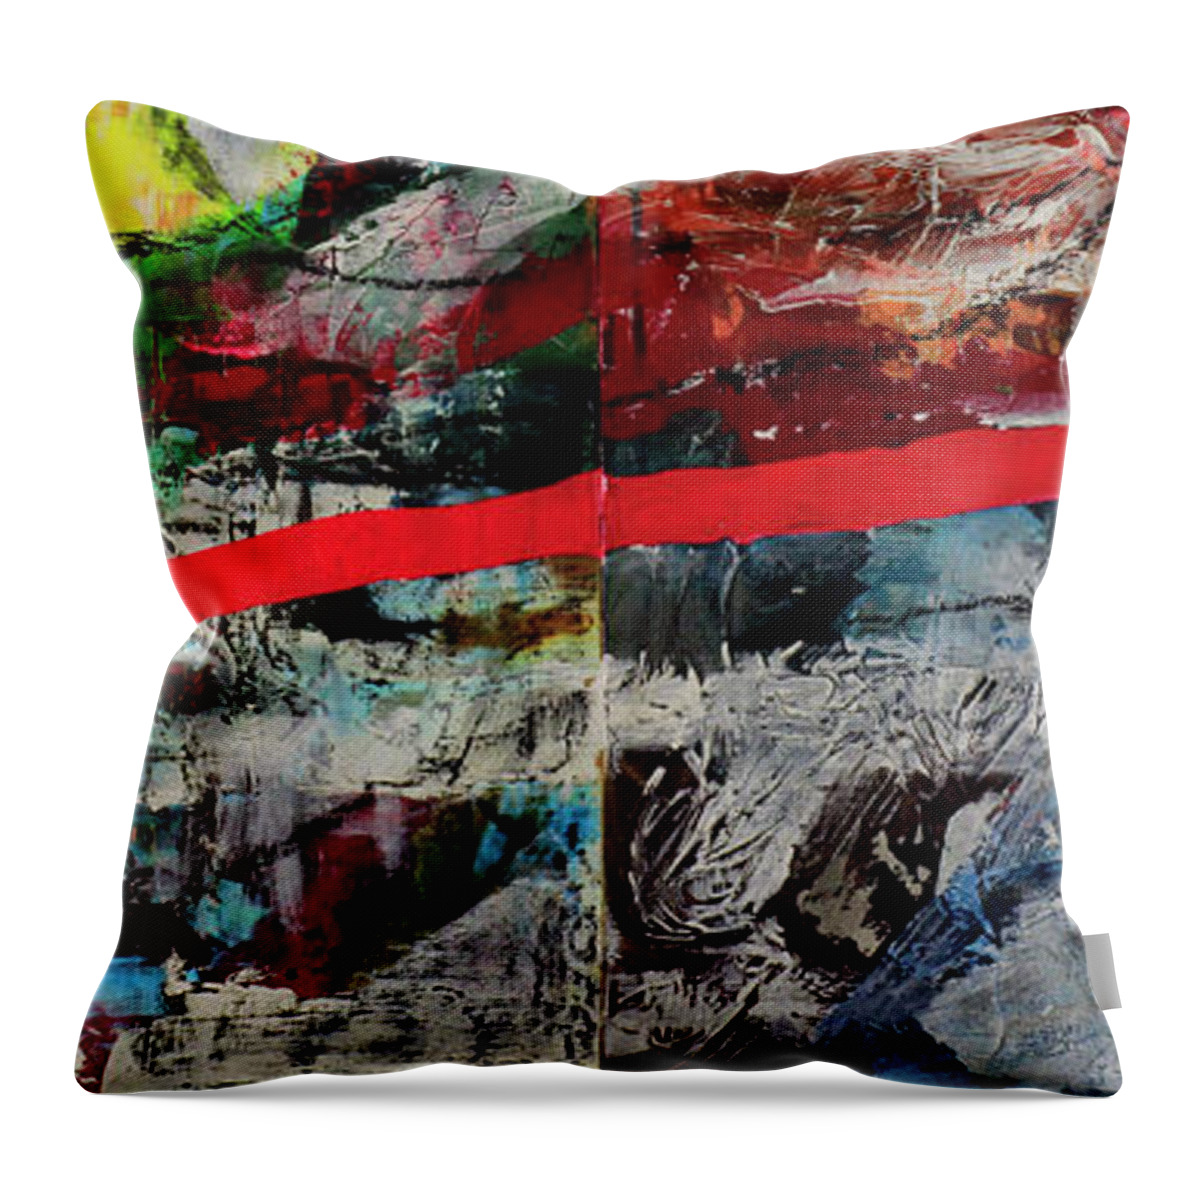 Abstract Expressionism Throw Pillow featuring the mixed media Composition 60520 by Walter Fahmy